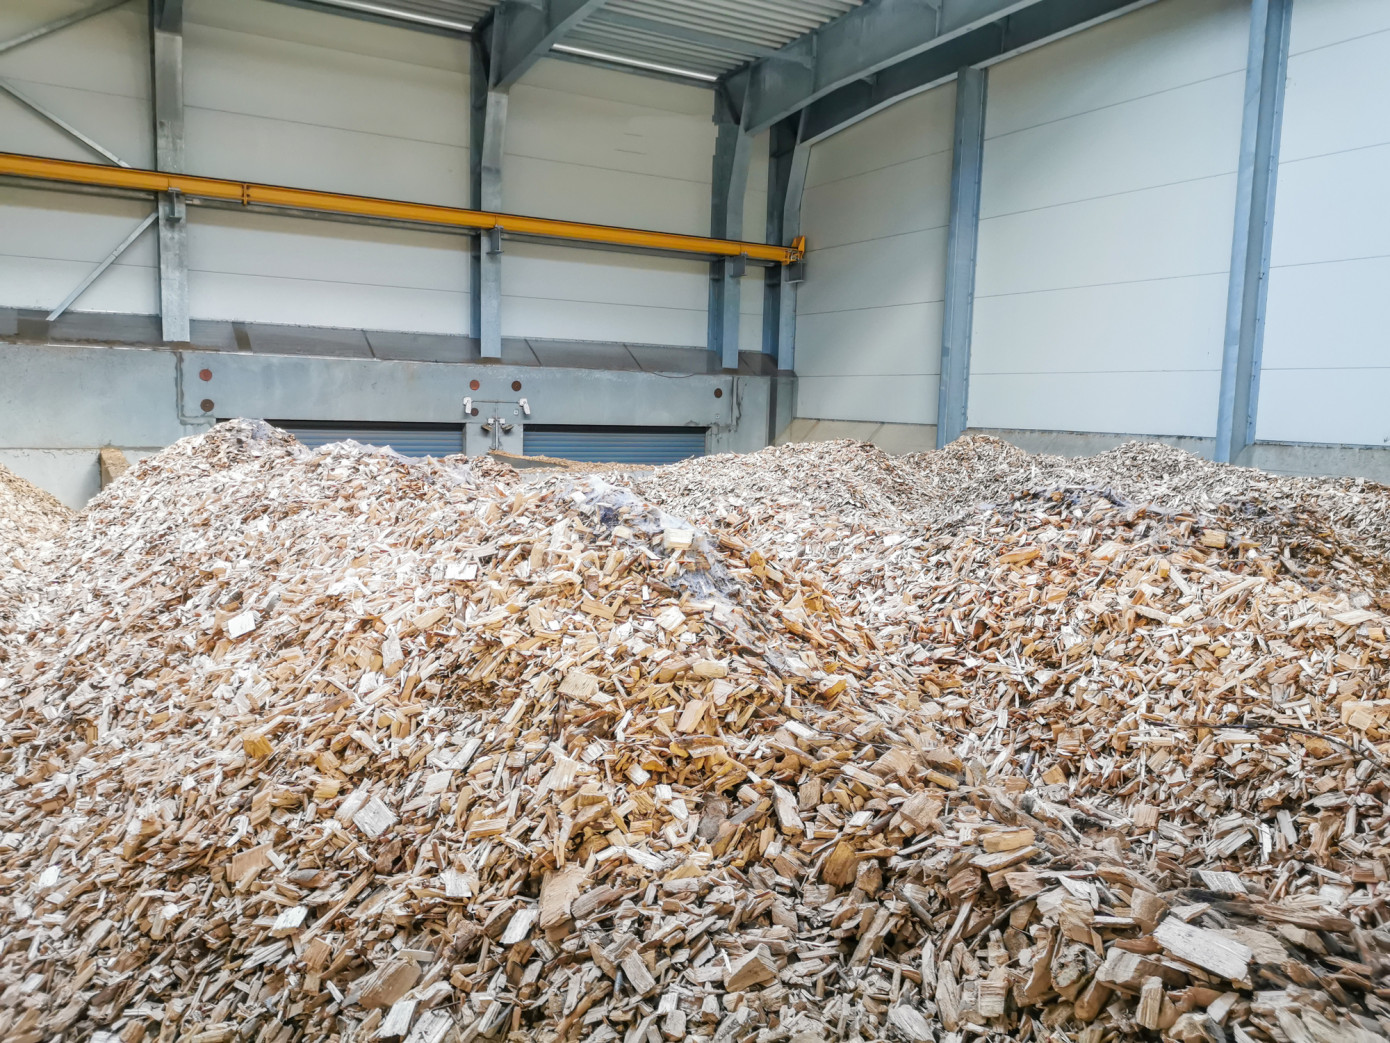 Imports of softwood chips to Turkey jump 85% in April